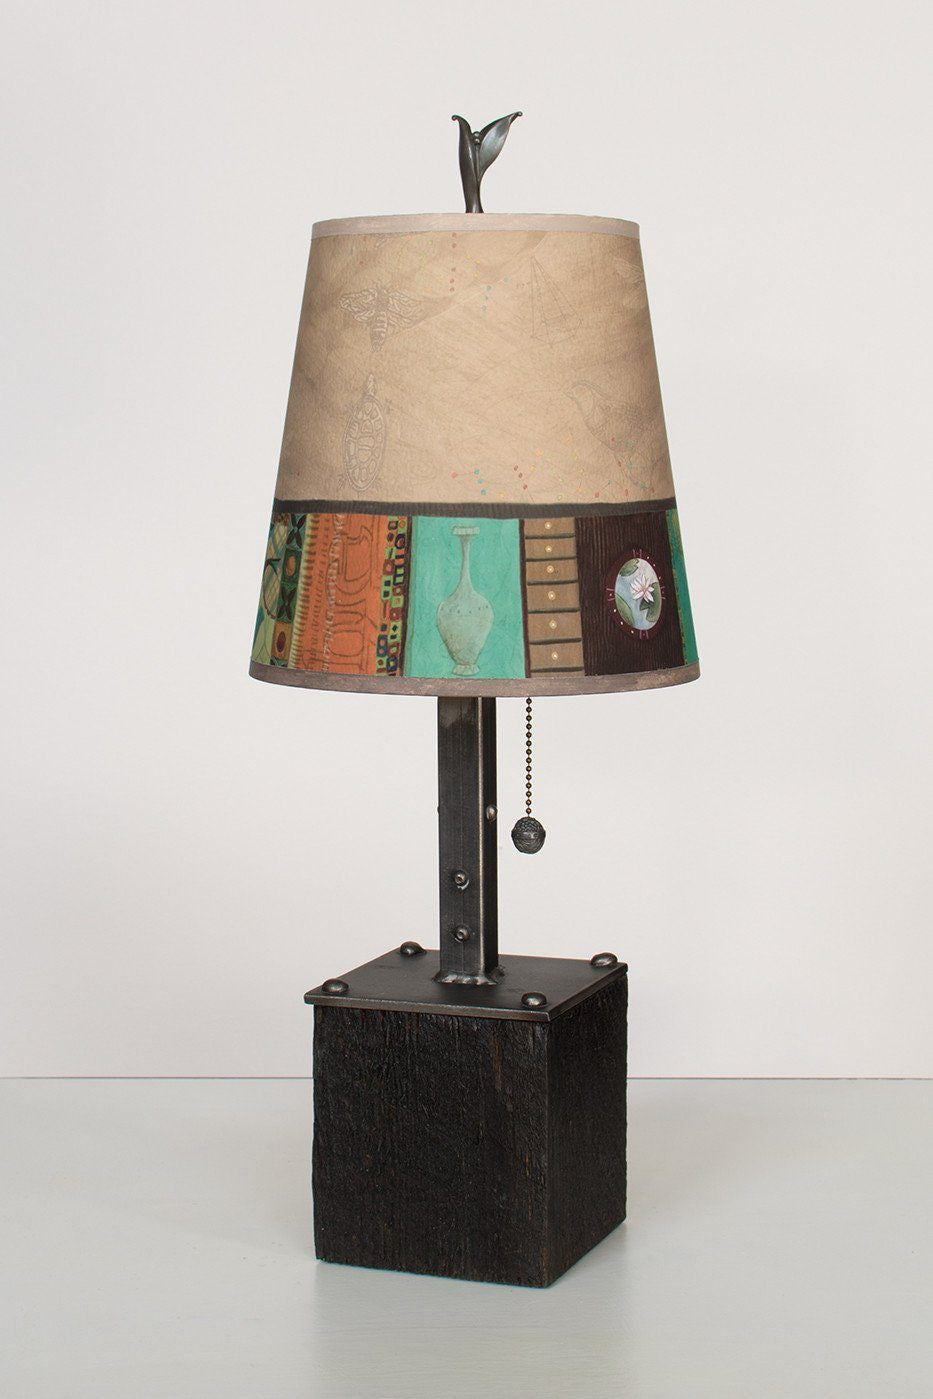 Steel Table Lamp on Reclaimed Wood with Small Drum Shade in Linen Match Lit